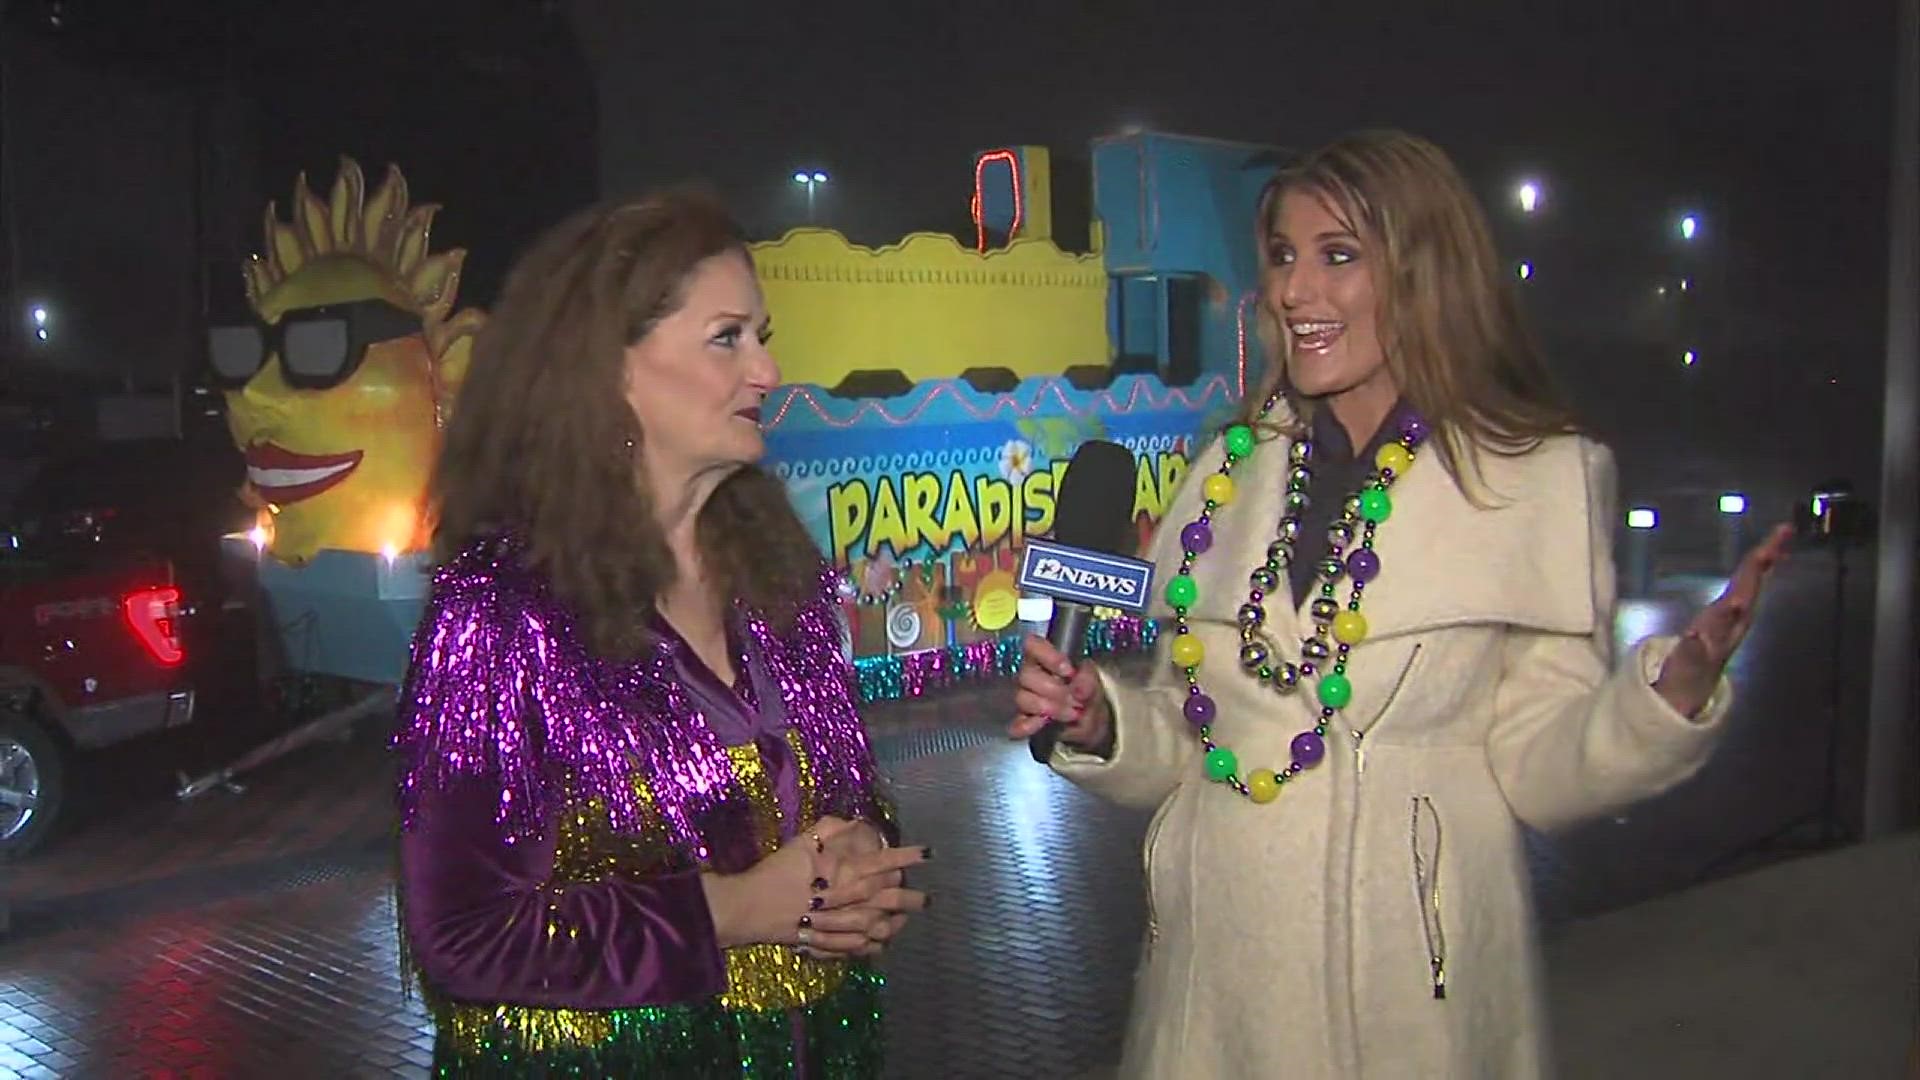 Mardi Gras Southeast Texas kicks off Thursday evening and runs through Sunday night featuring parades, music, food, carnival rides and more.